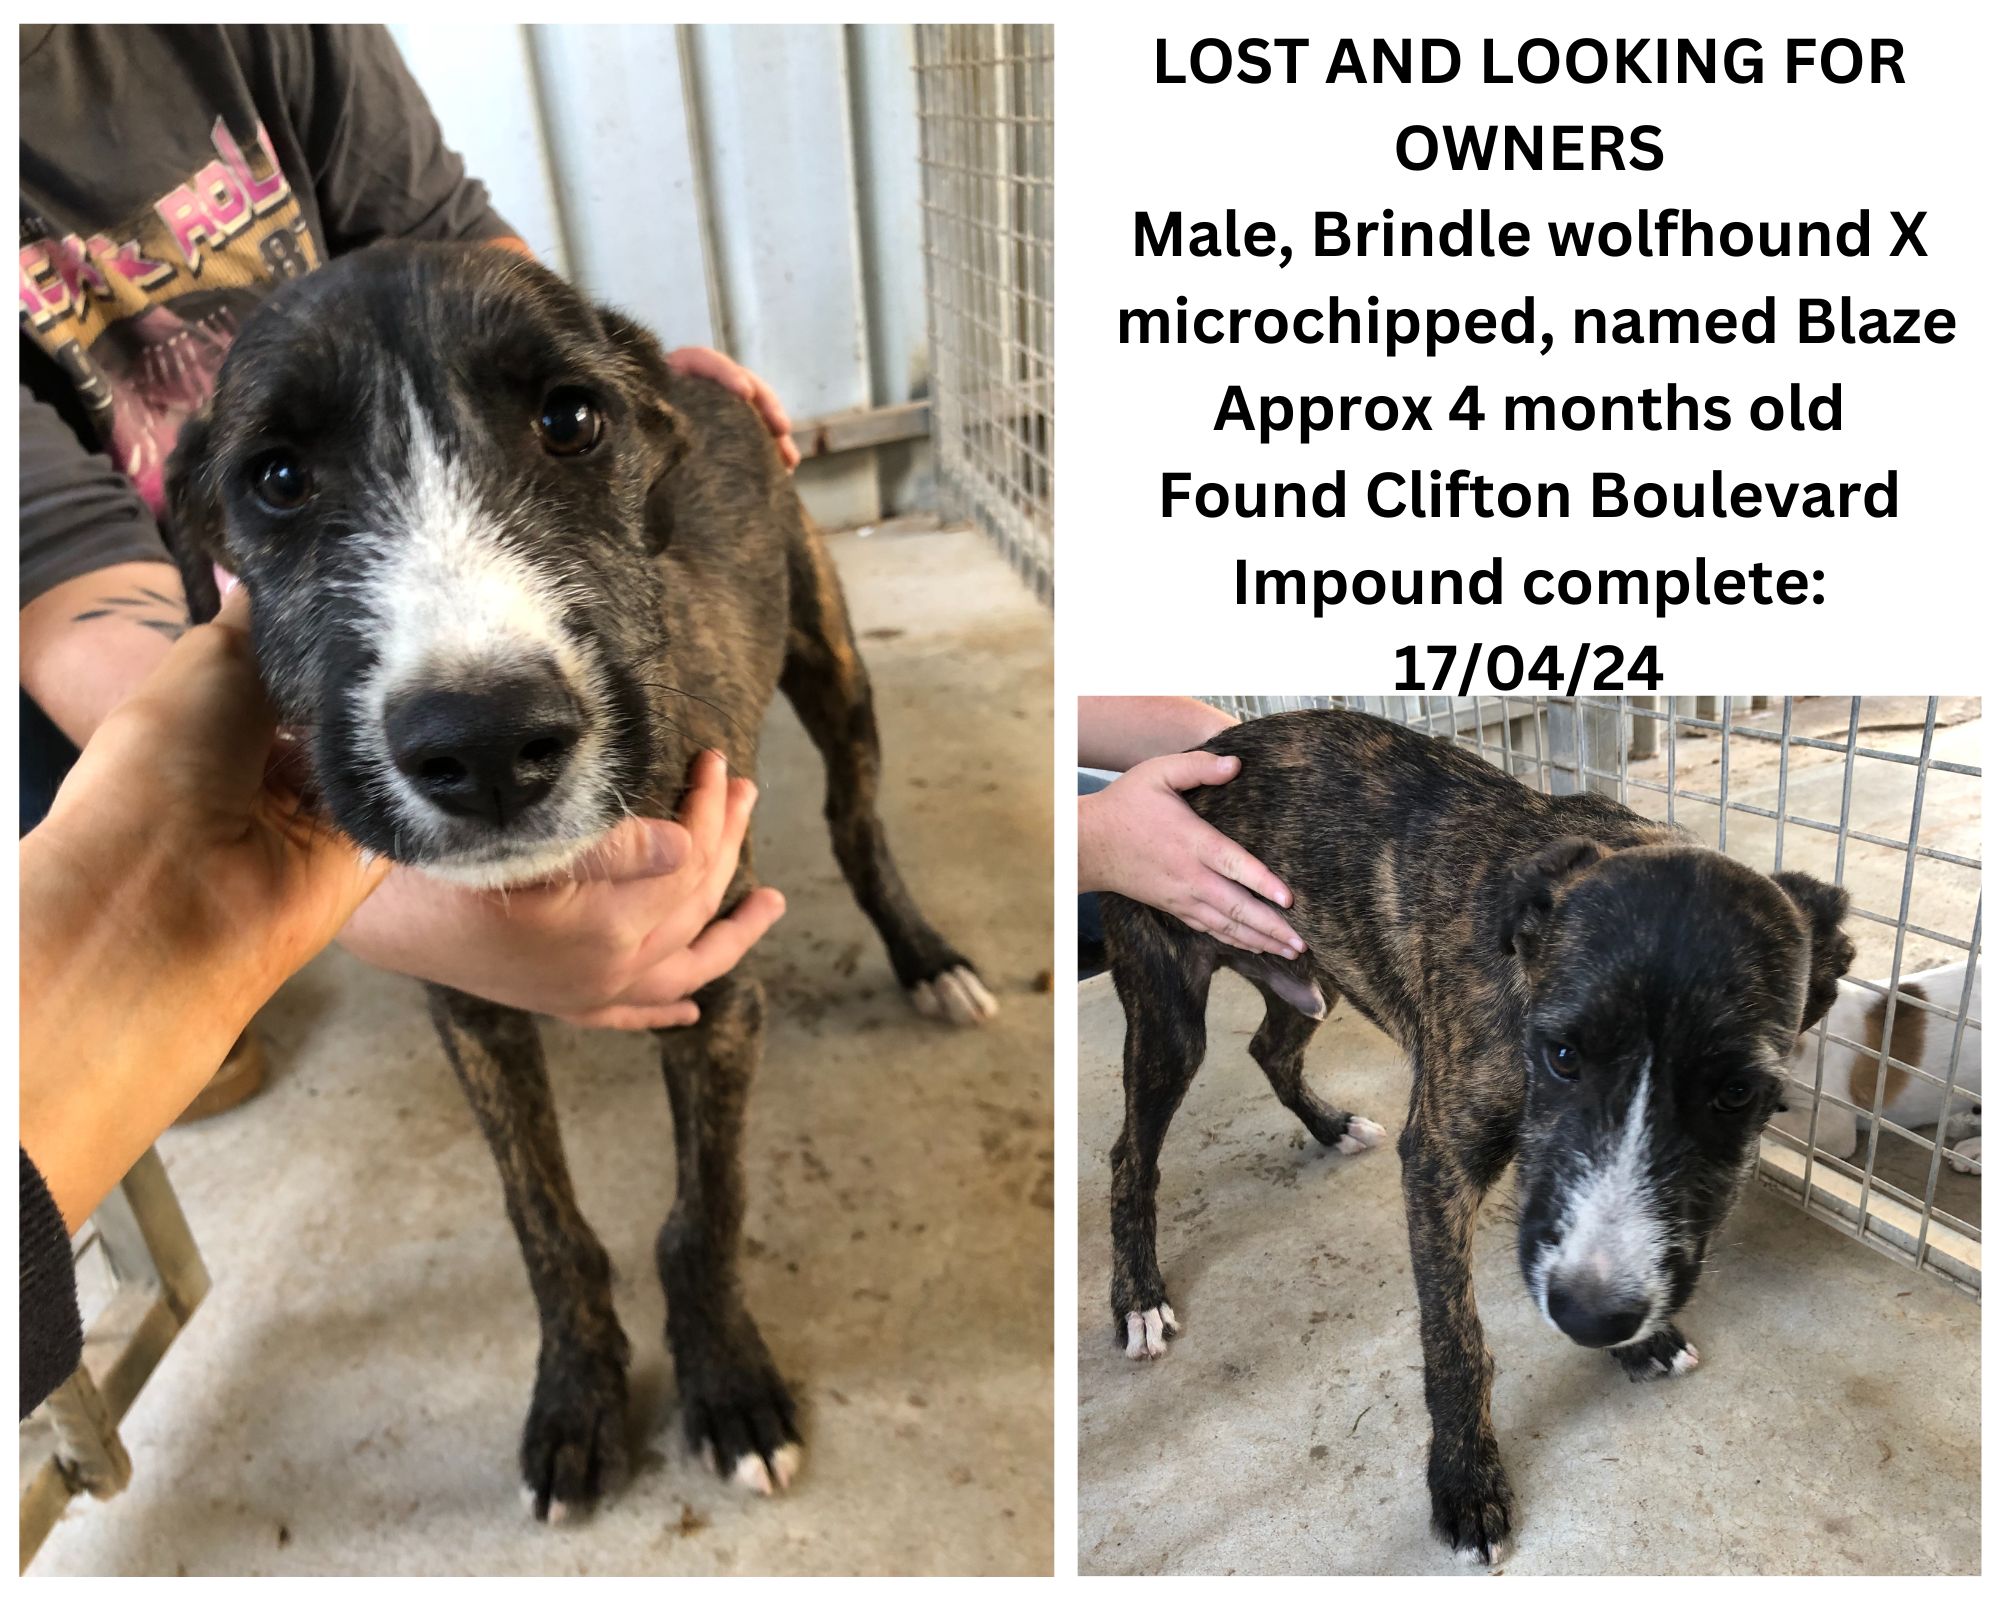 Wolfhound x (Possibly Great Dane)   | 4 months old   | Microchipped   | Found Clifton Boulevard